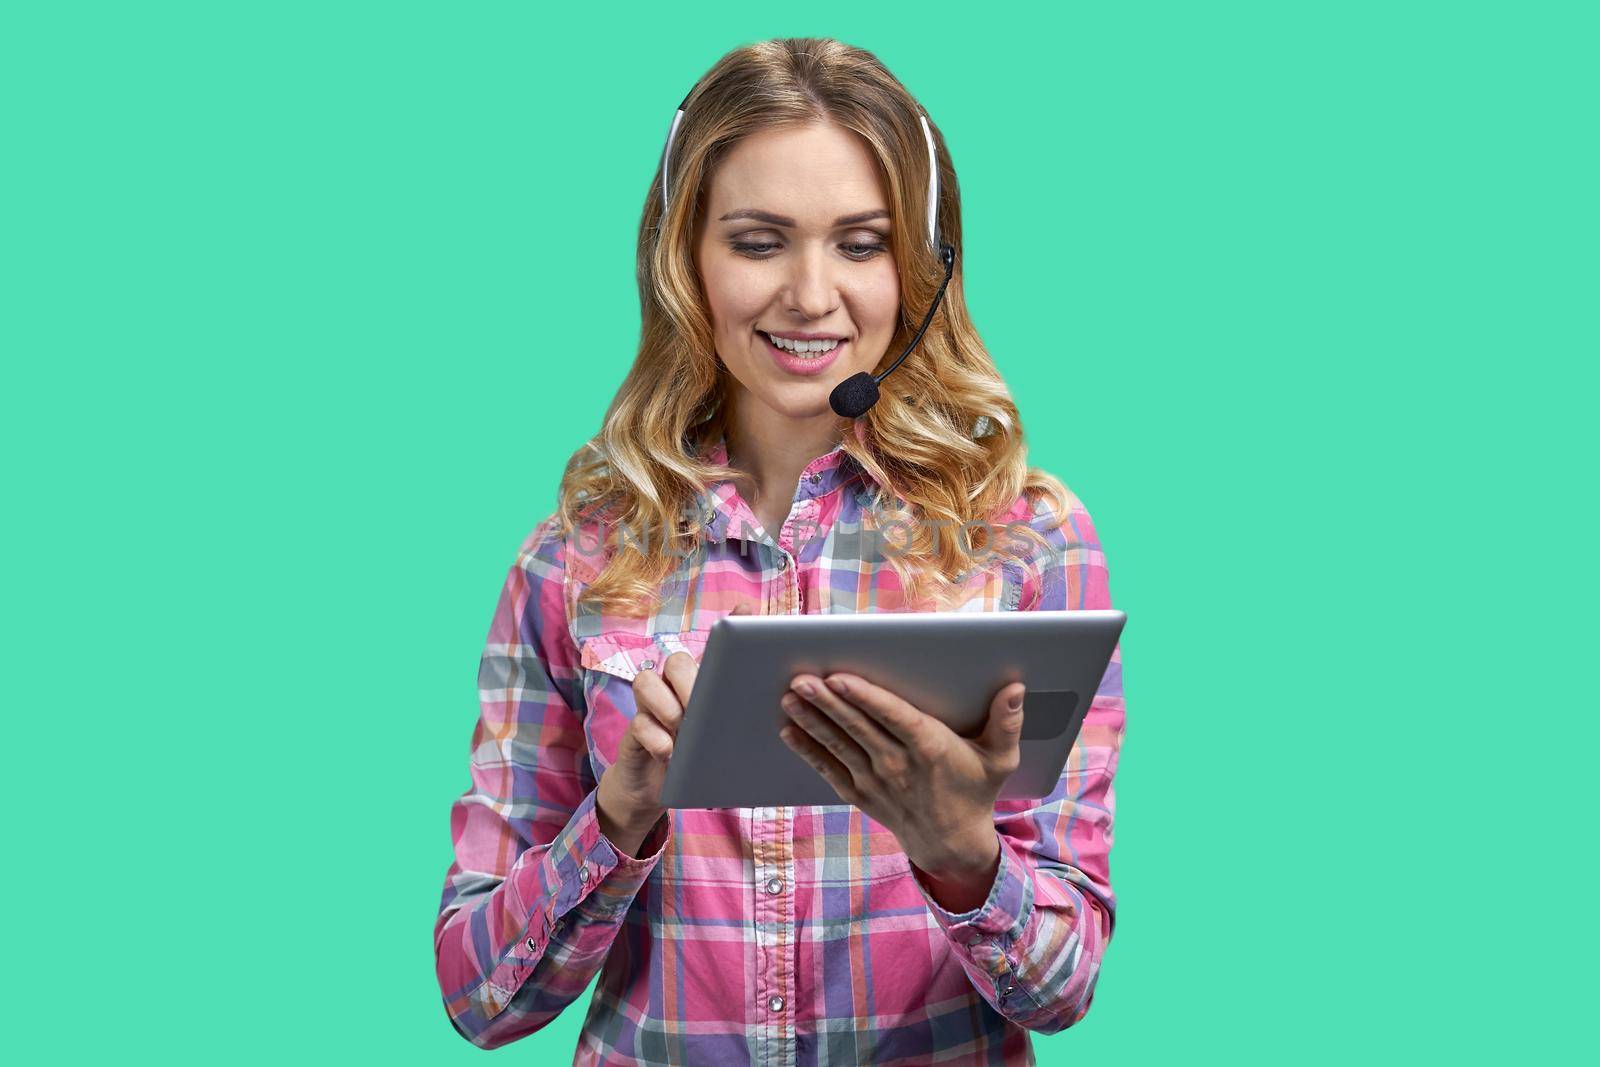 Customer service worker with headset using computer tablet. Female customer support agent working on tablet pc against green background.